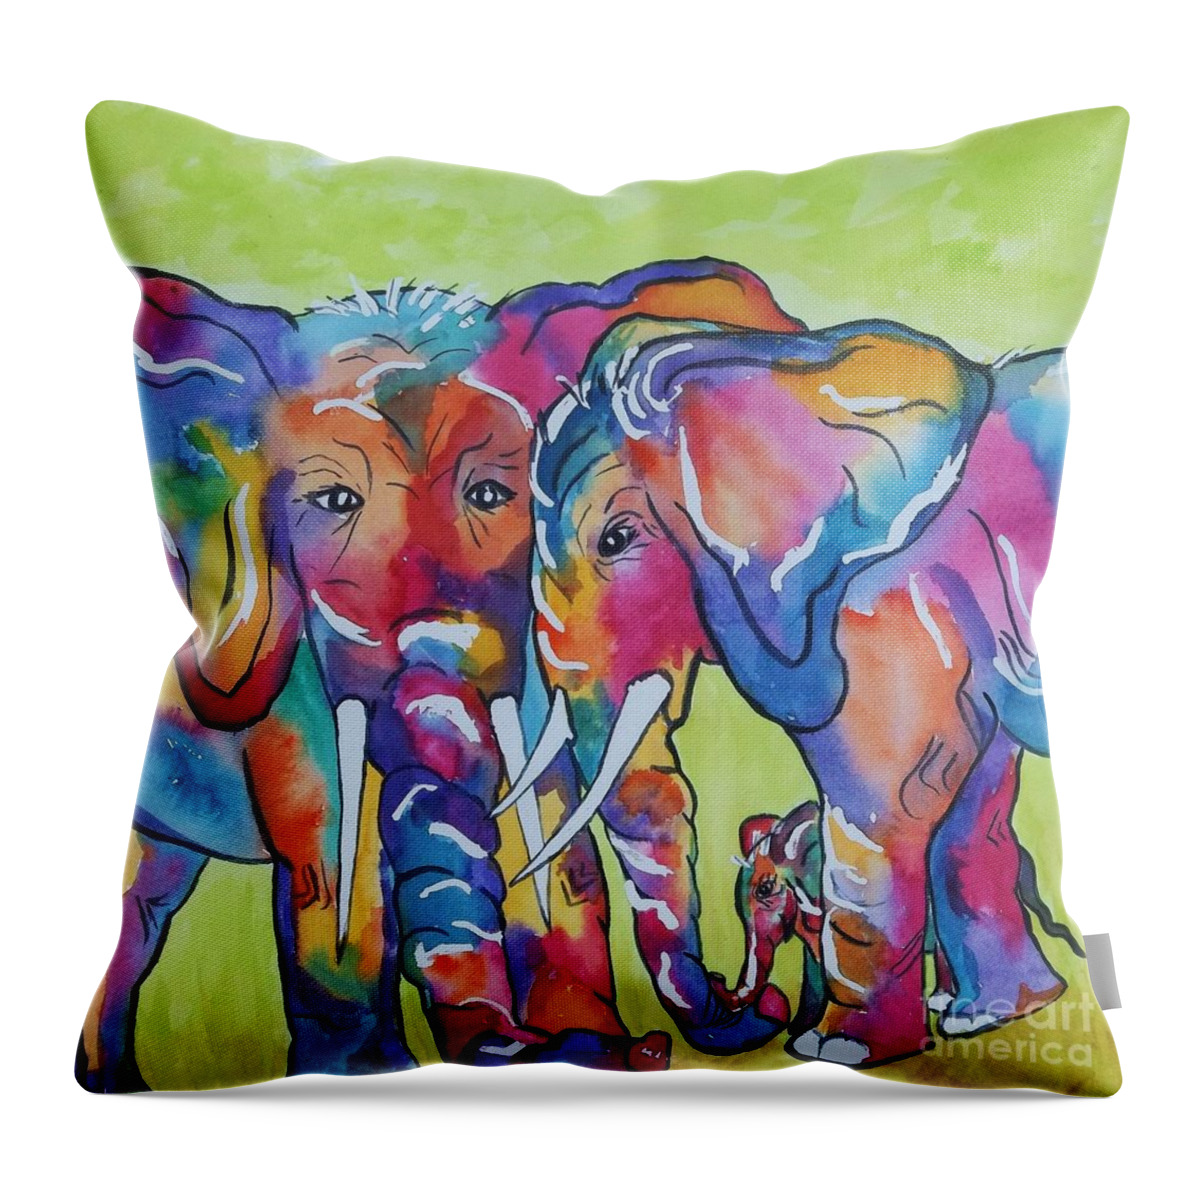 Elephants Throw Pillow featuring the painting The Protectors Square Format by Ellen Levinson